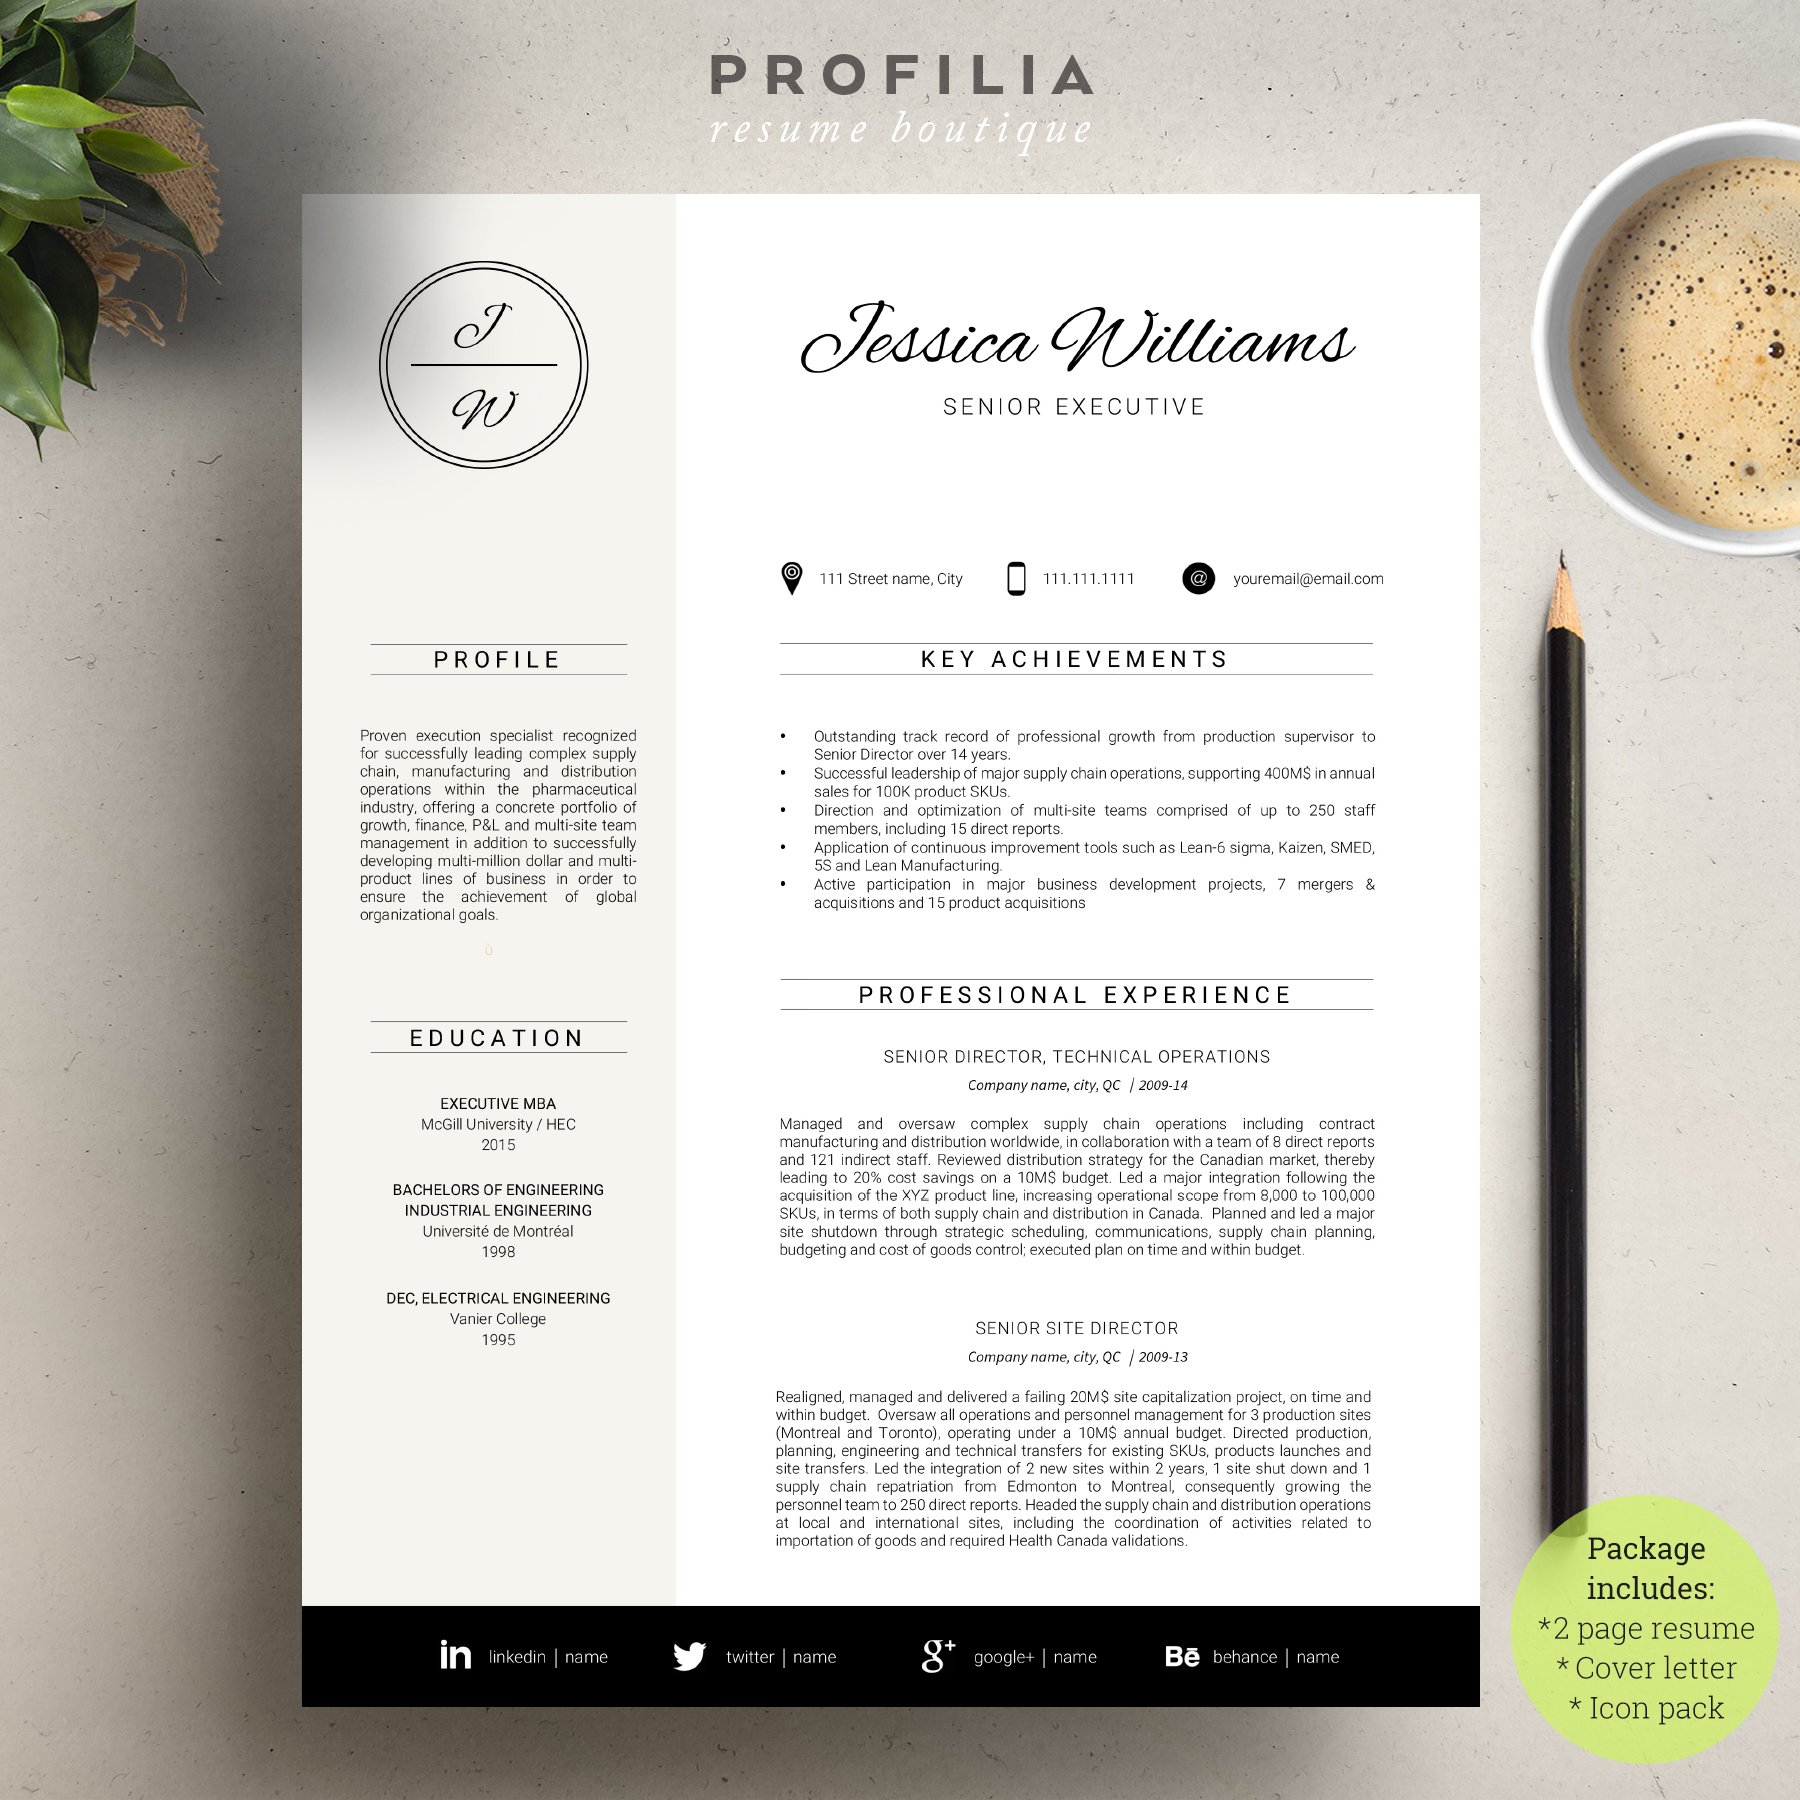 Word Resume & Cover letter Template cover image.